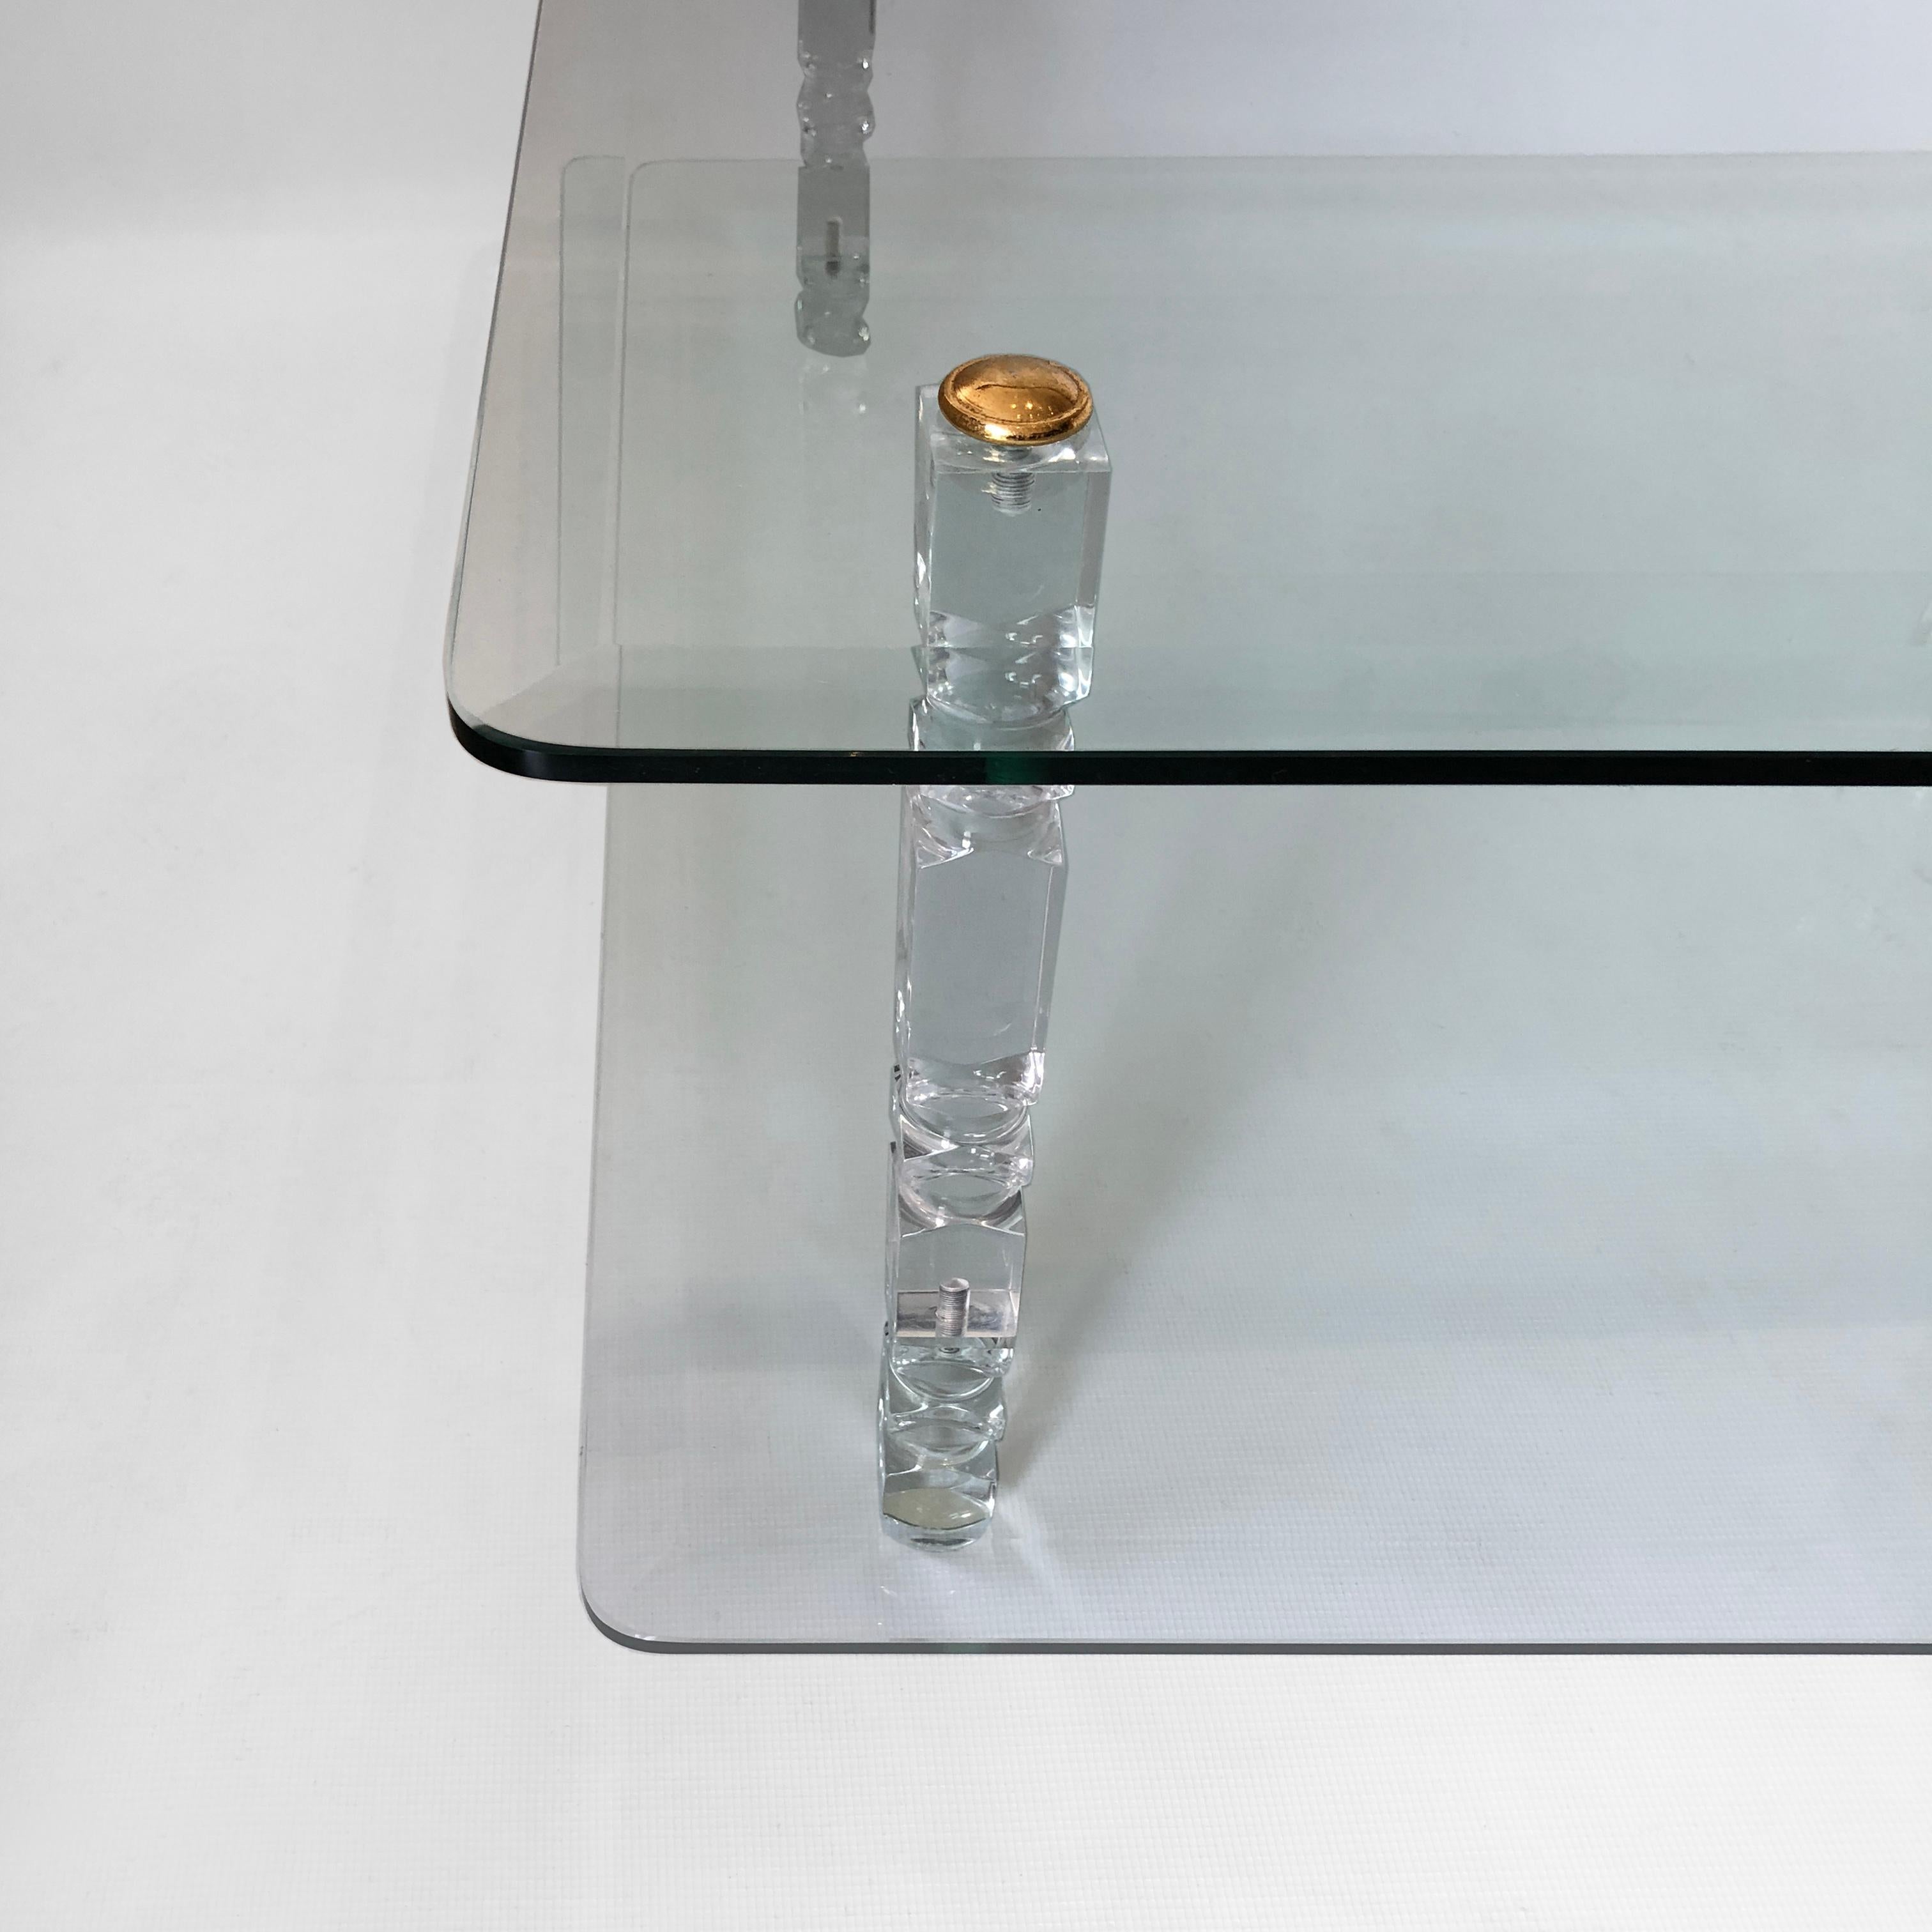 Two-Tier Lucite Glass Brass Coffee Table 1970s Modernist Charles Hollis Jones For Sale 2